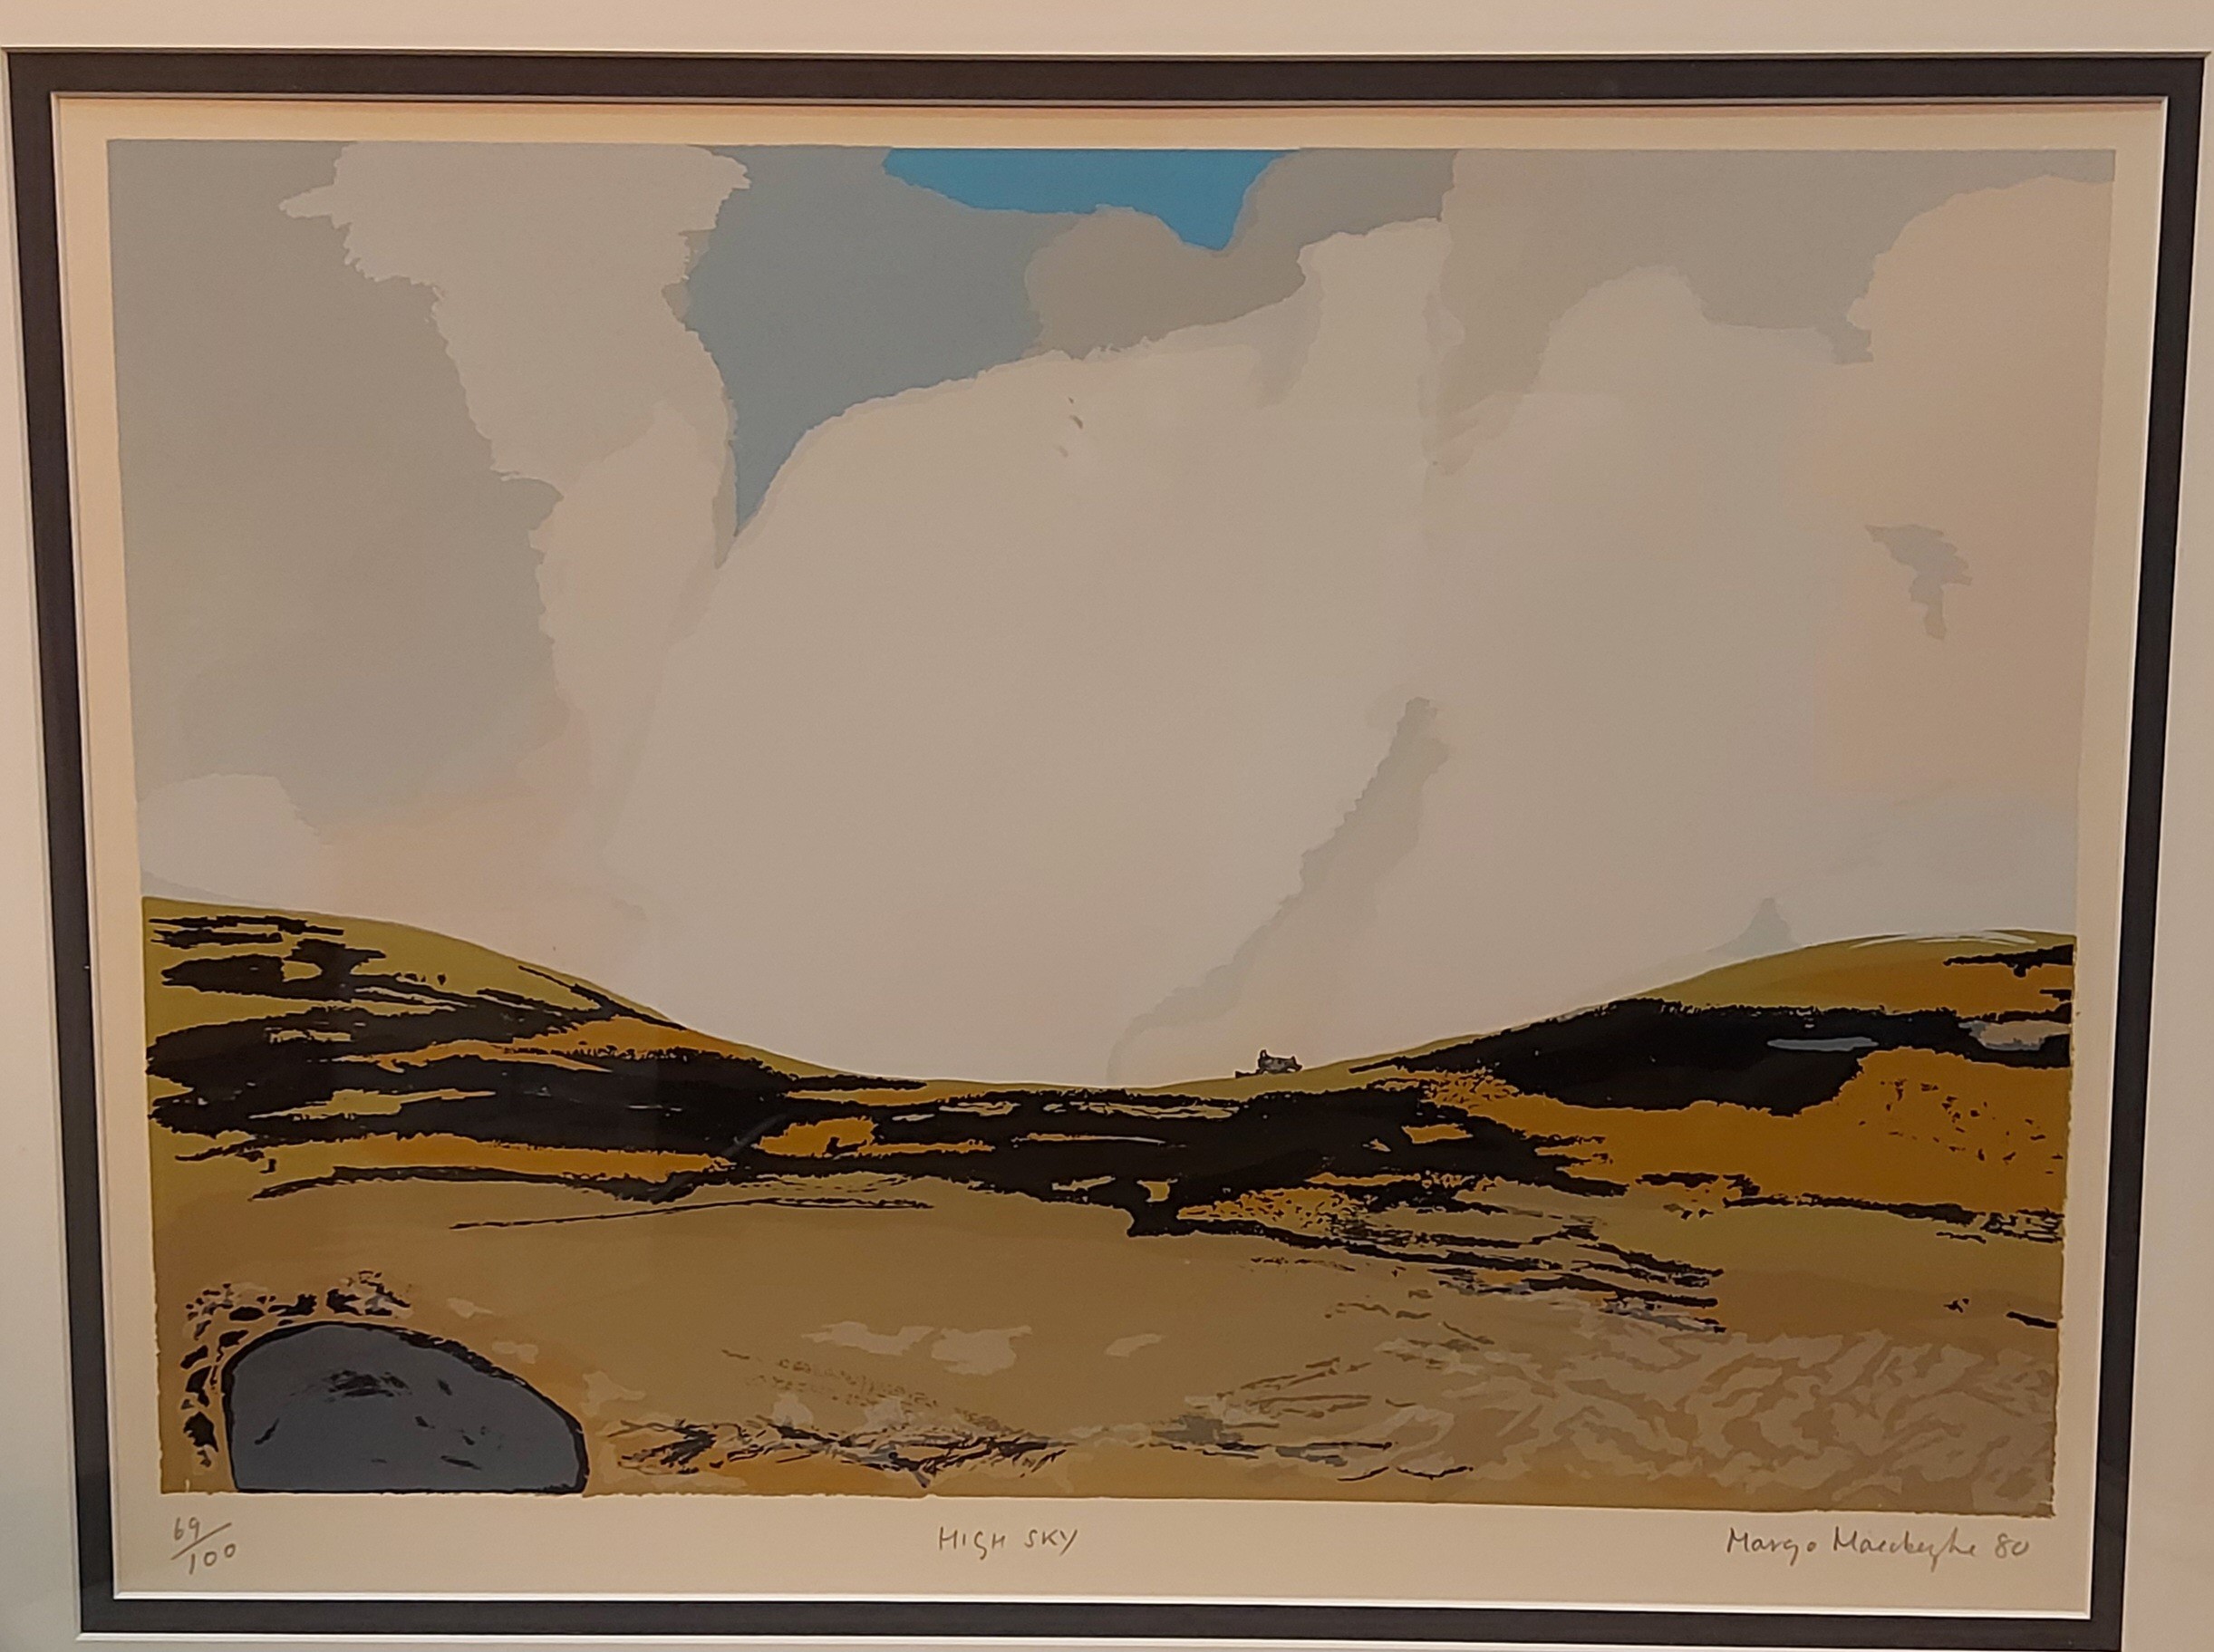 Margo Maeckelberghe, High Sky, Signed, limited edition screenprint number 69/100 from the Penwith